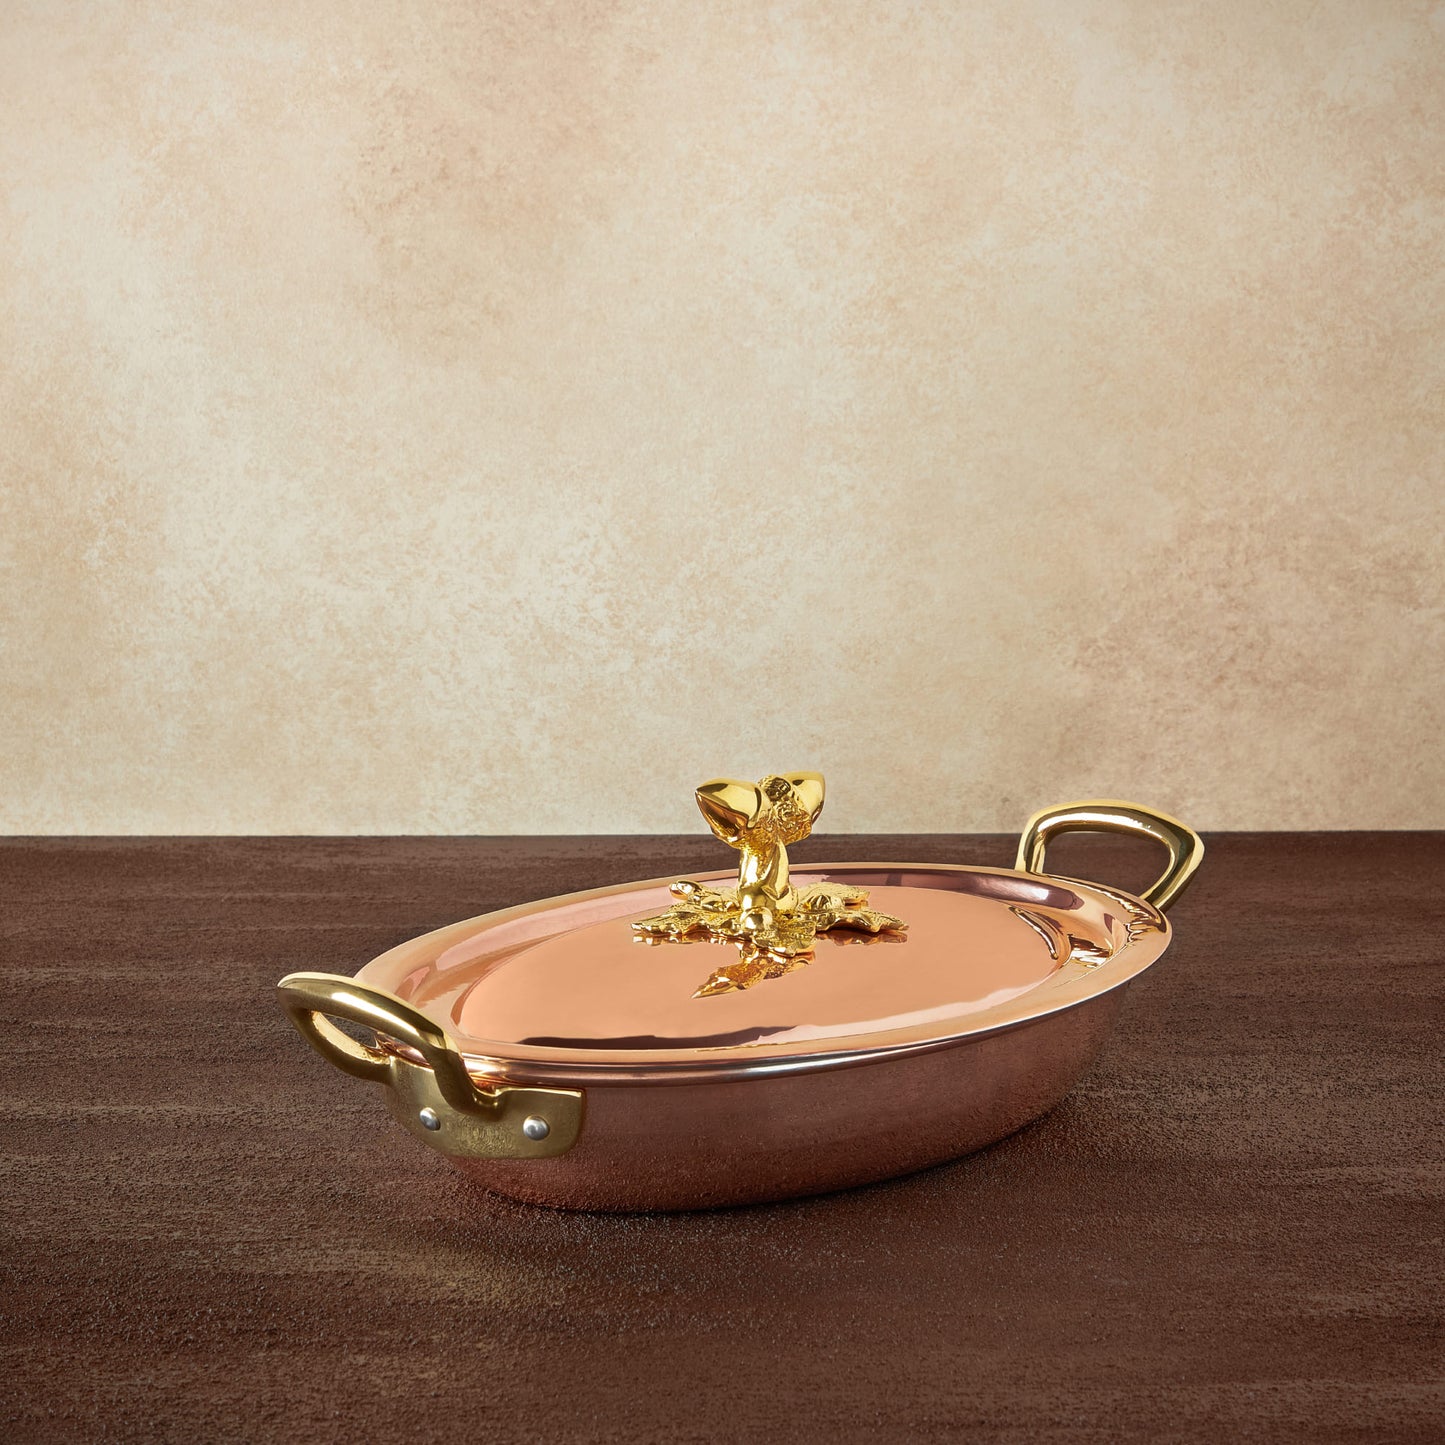 Hammered copper 11" Covered  Oval Gratin lined with high purity tin applied by hand over fire and bronze handles, from Ruffoni Historia collection